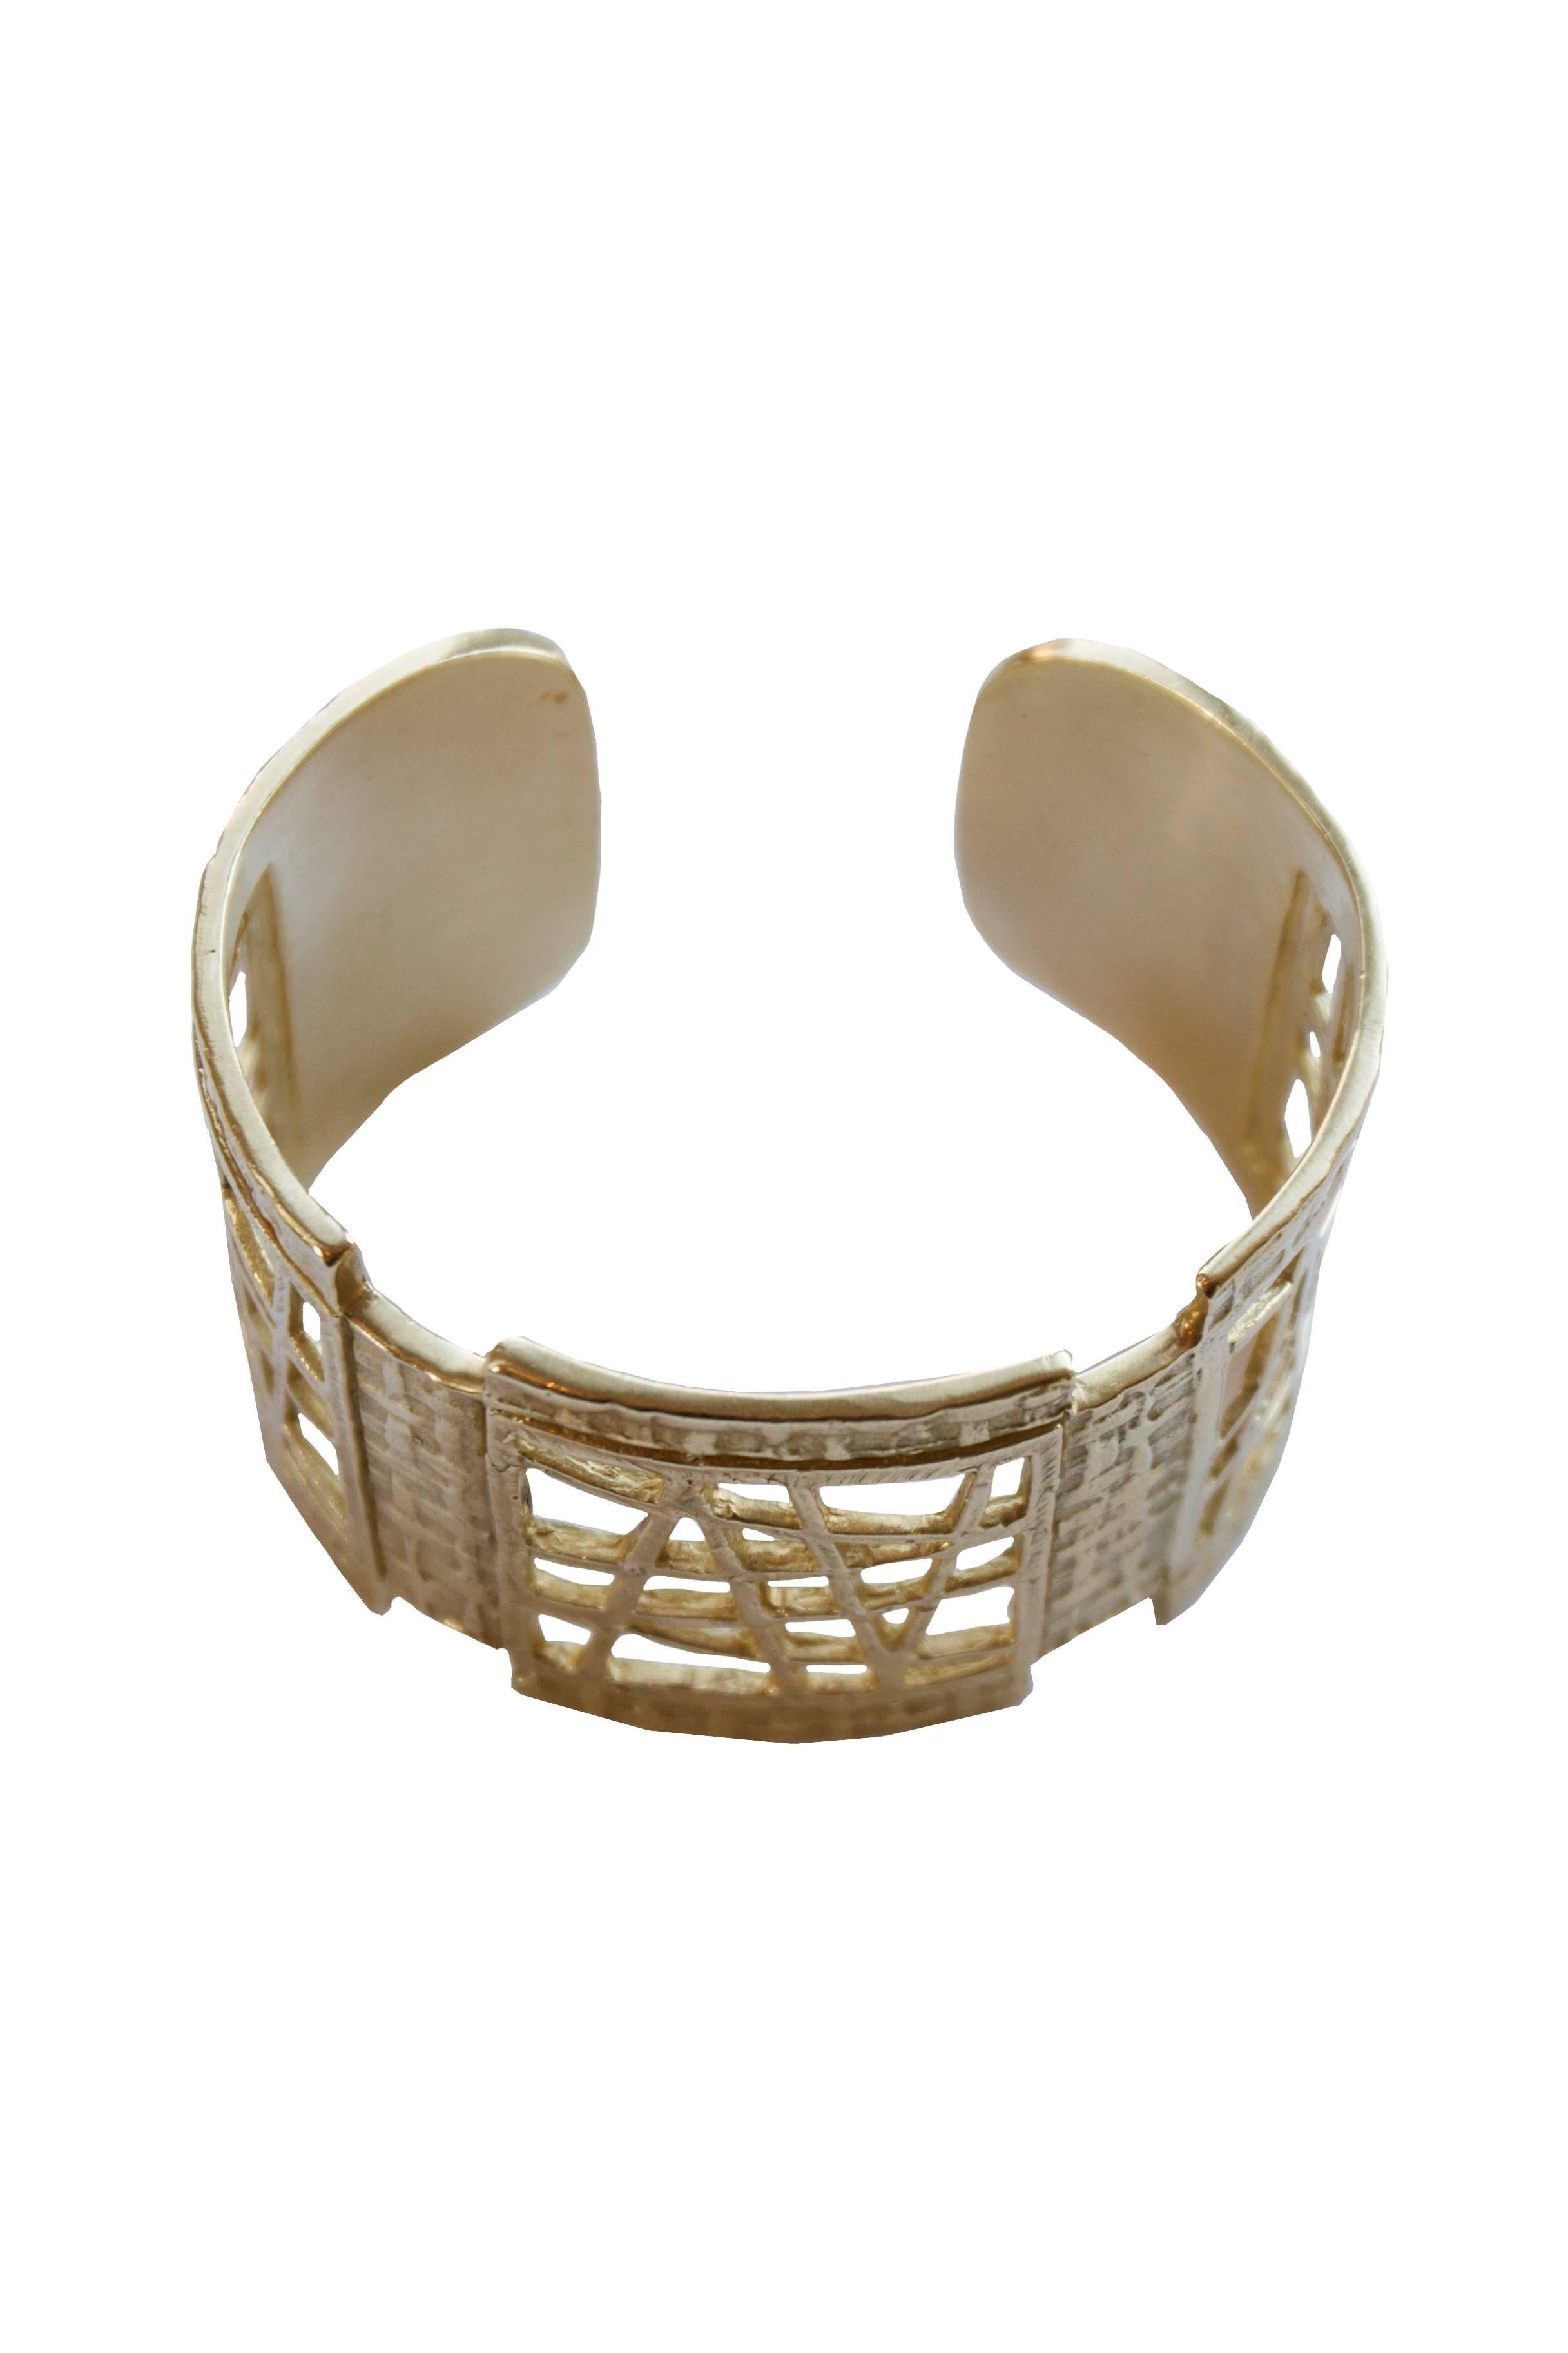 Joan Hornig Gold Avenue Cuff Bracelet In New Condition For Sale In New York, NY